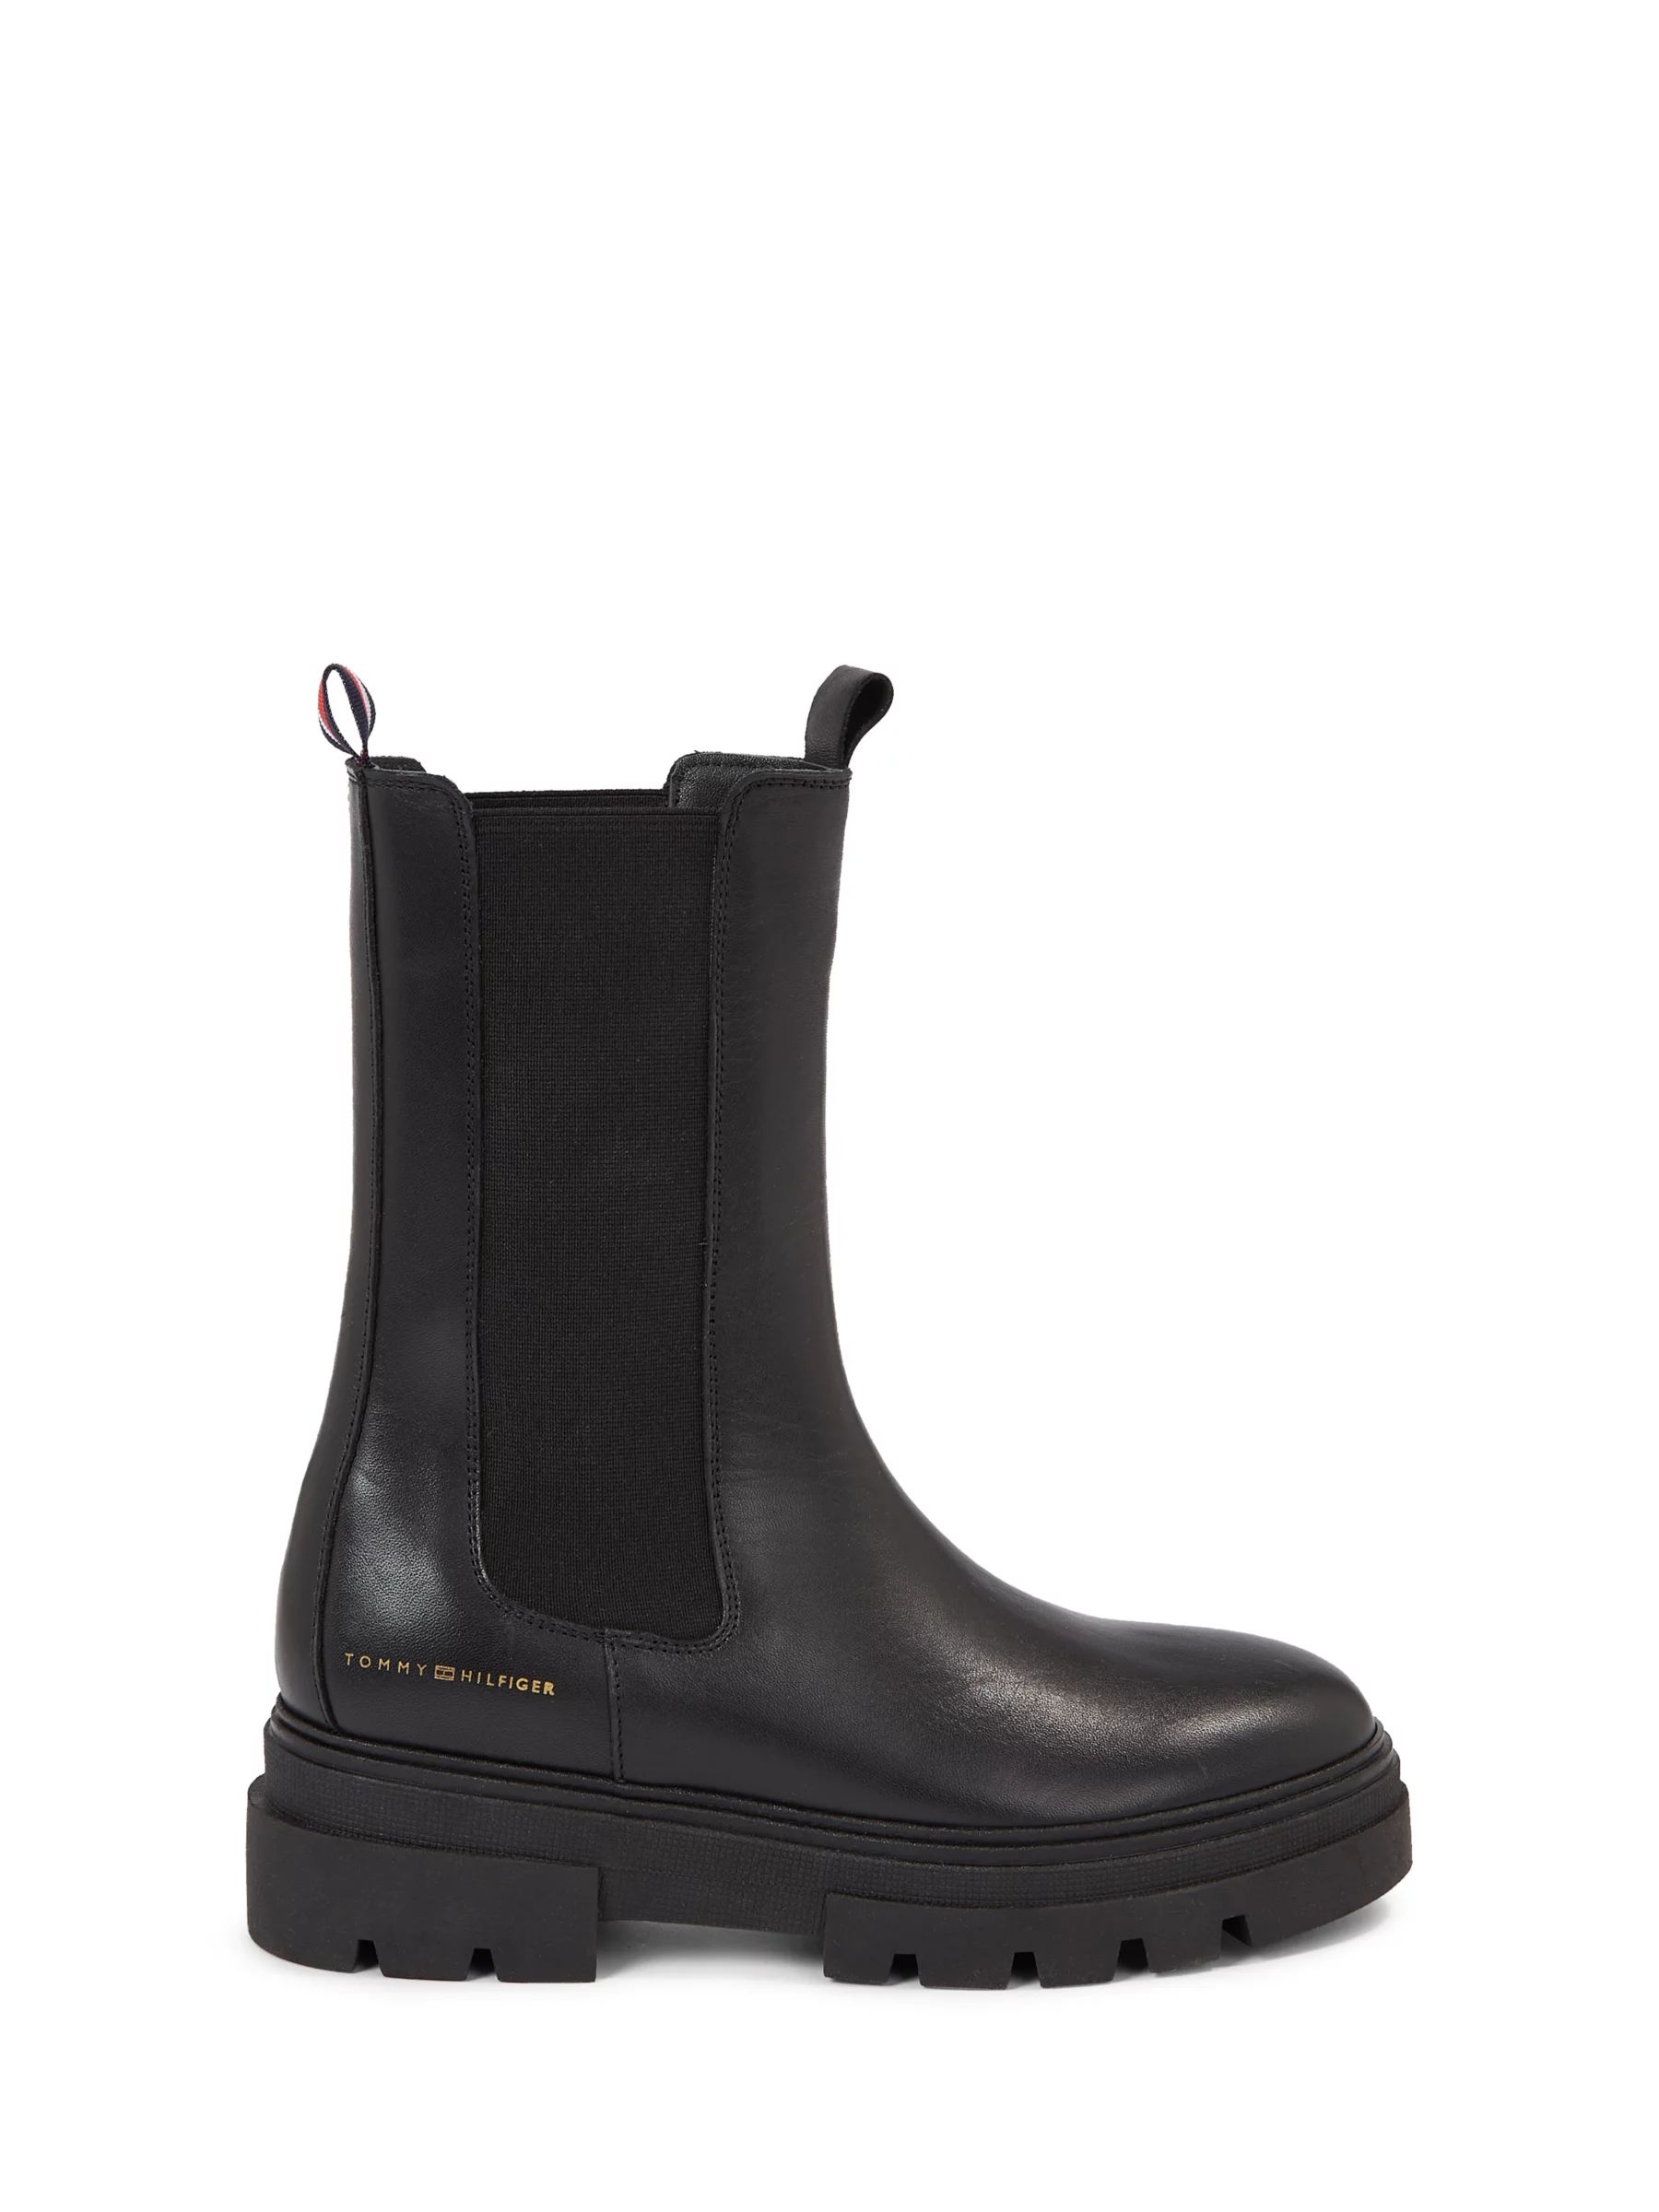 Tommy Hilfiger Leather Chunky Sole Chelsea Boots, Black | John Lewis (UK)